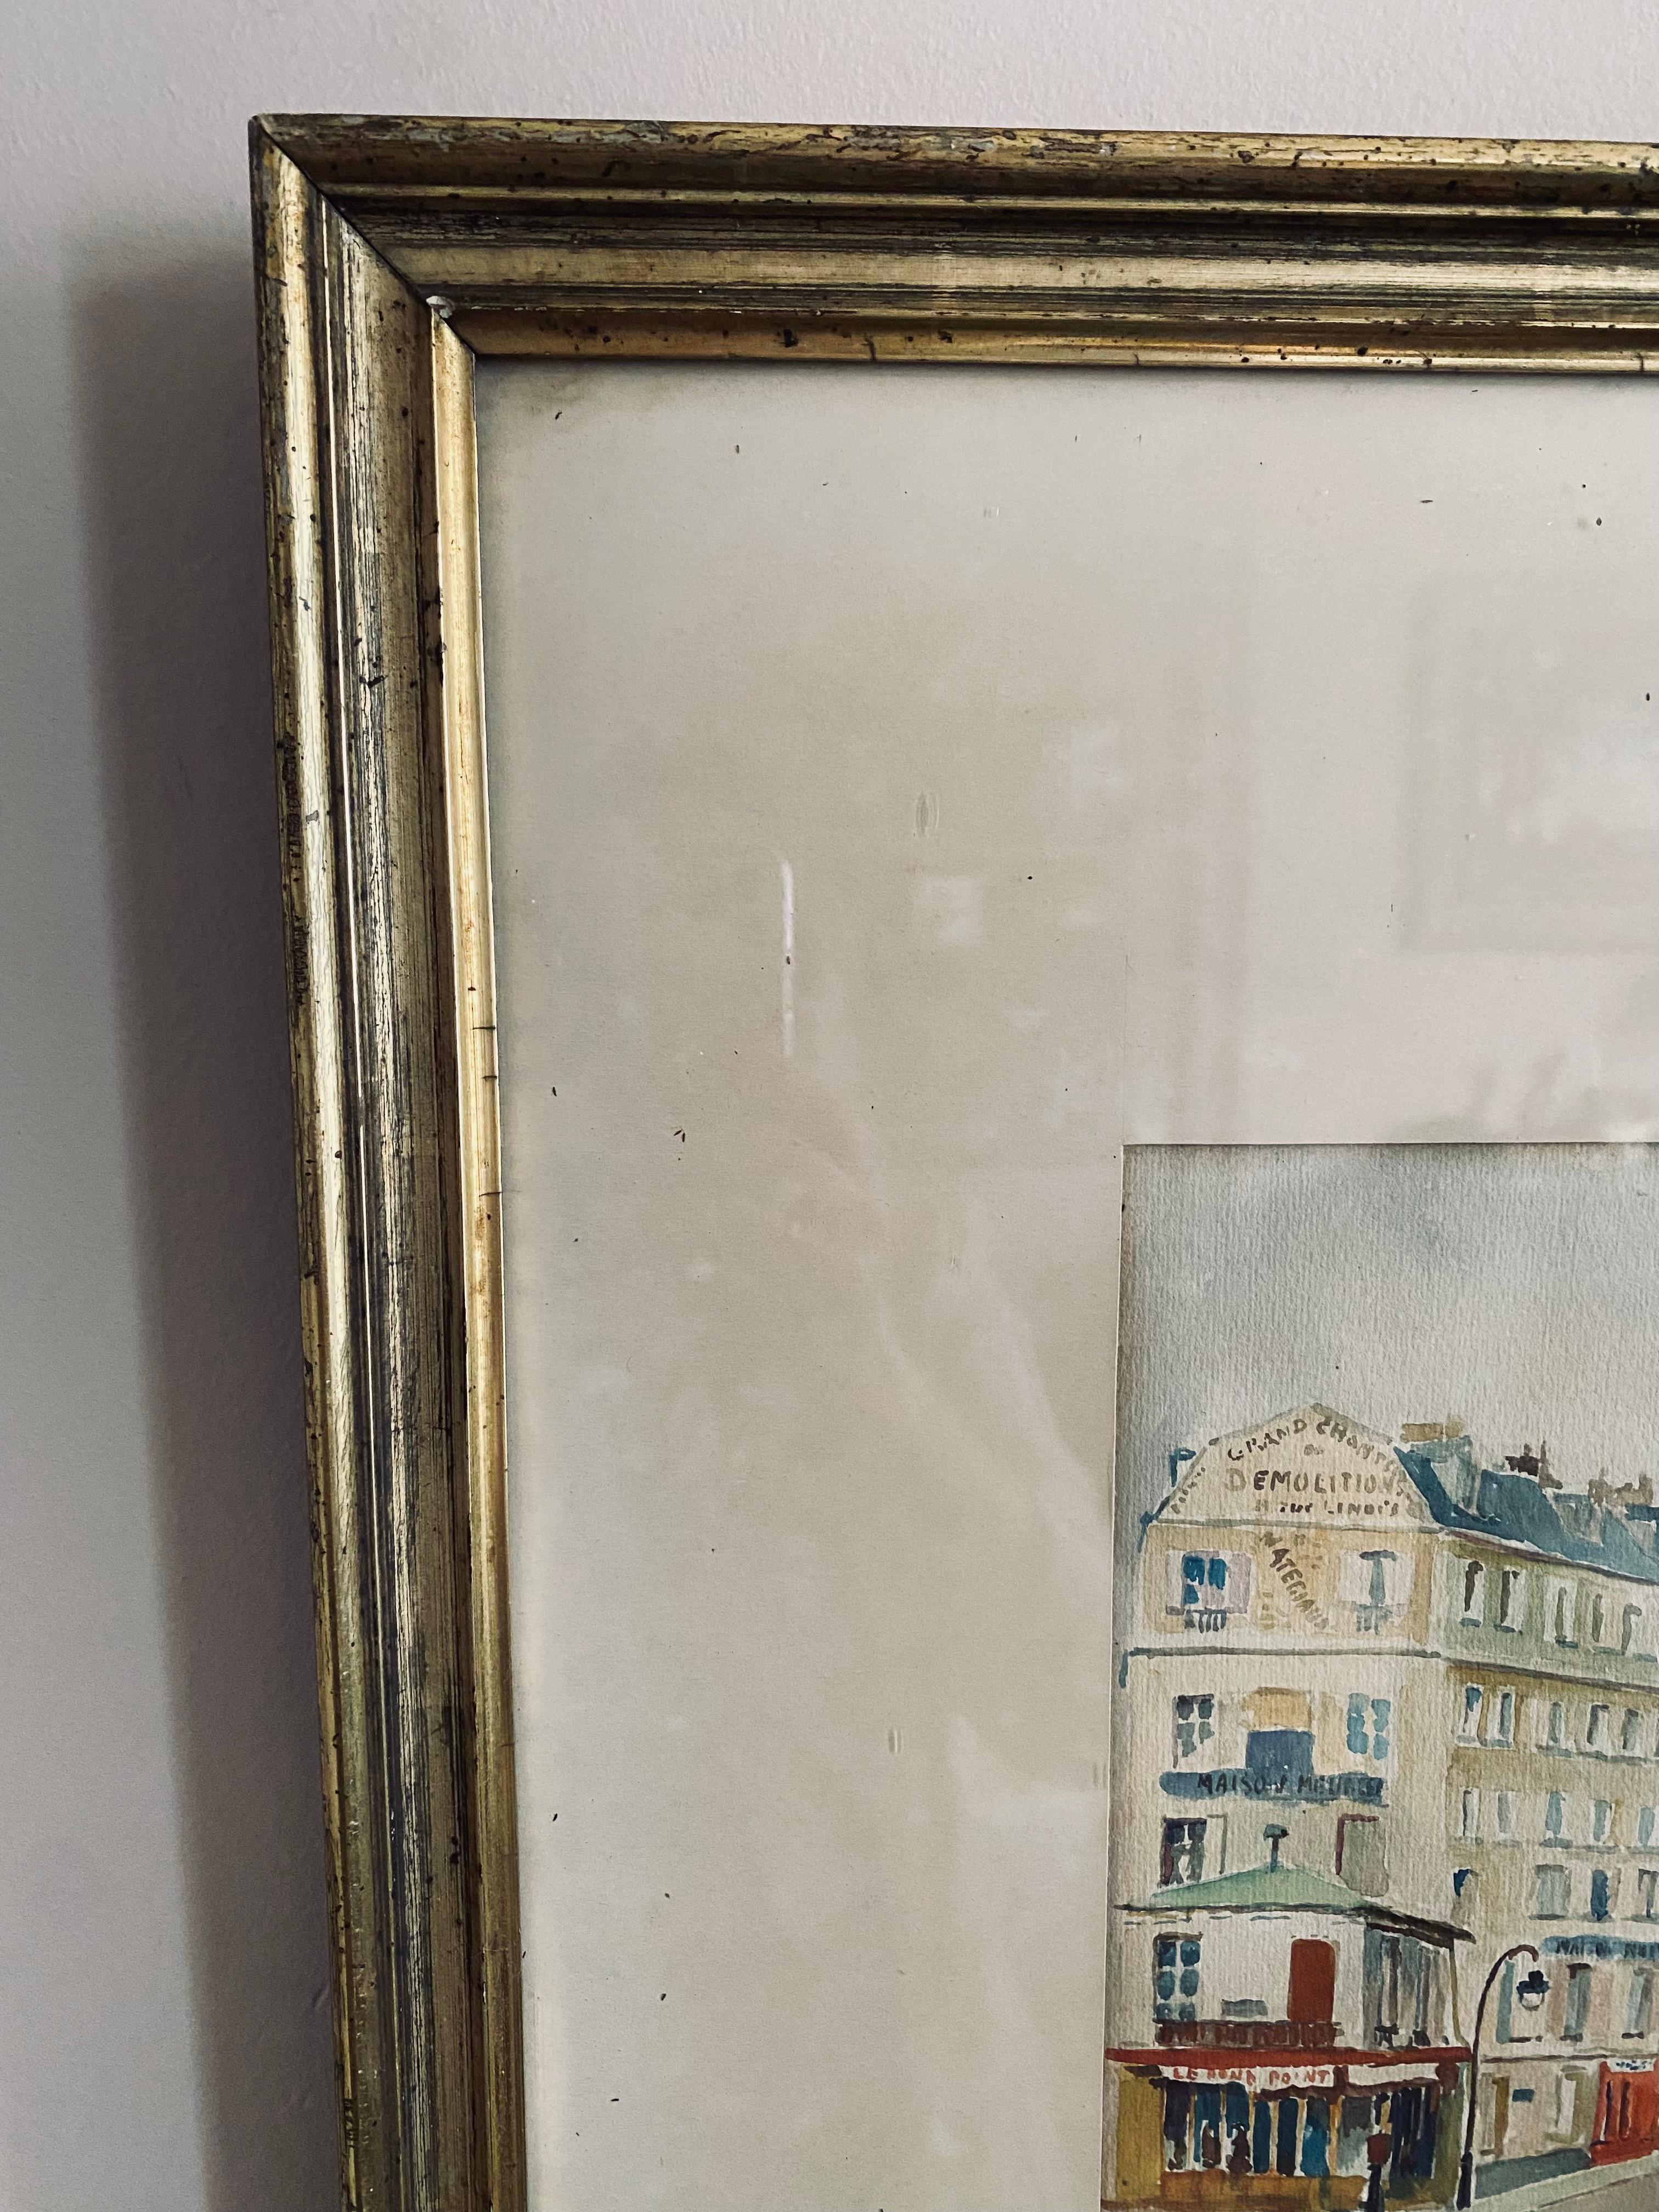 The watercolor of a Paris street scene by A. Paly (1889-1979) is framed in a beautiful 19th century frame. The gouache dates from the early 20th century and conveys the French attitude to life with just a few brush strokes.
The frame is